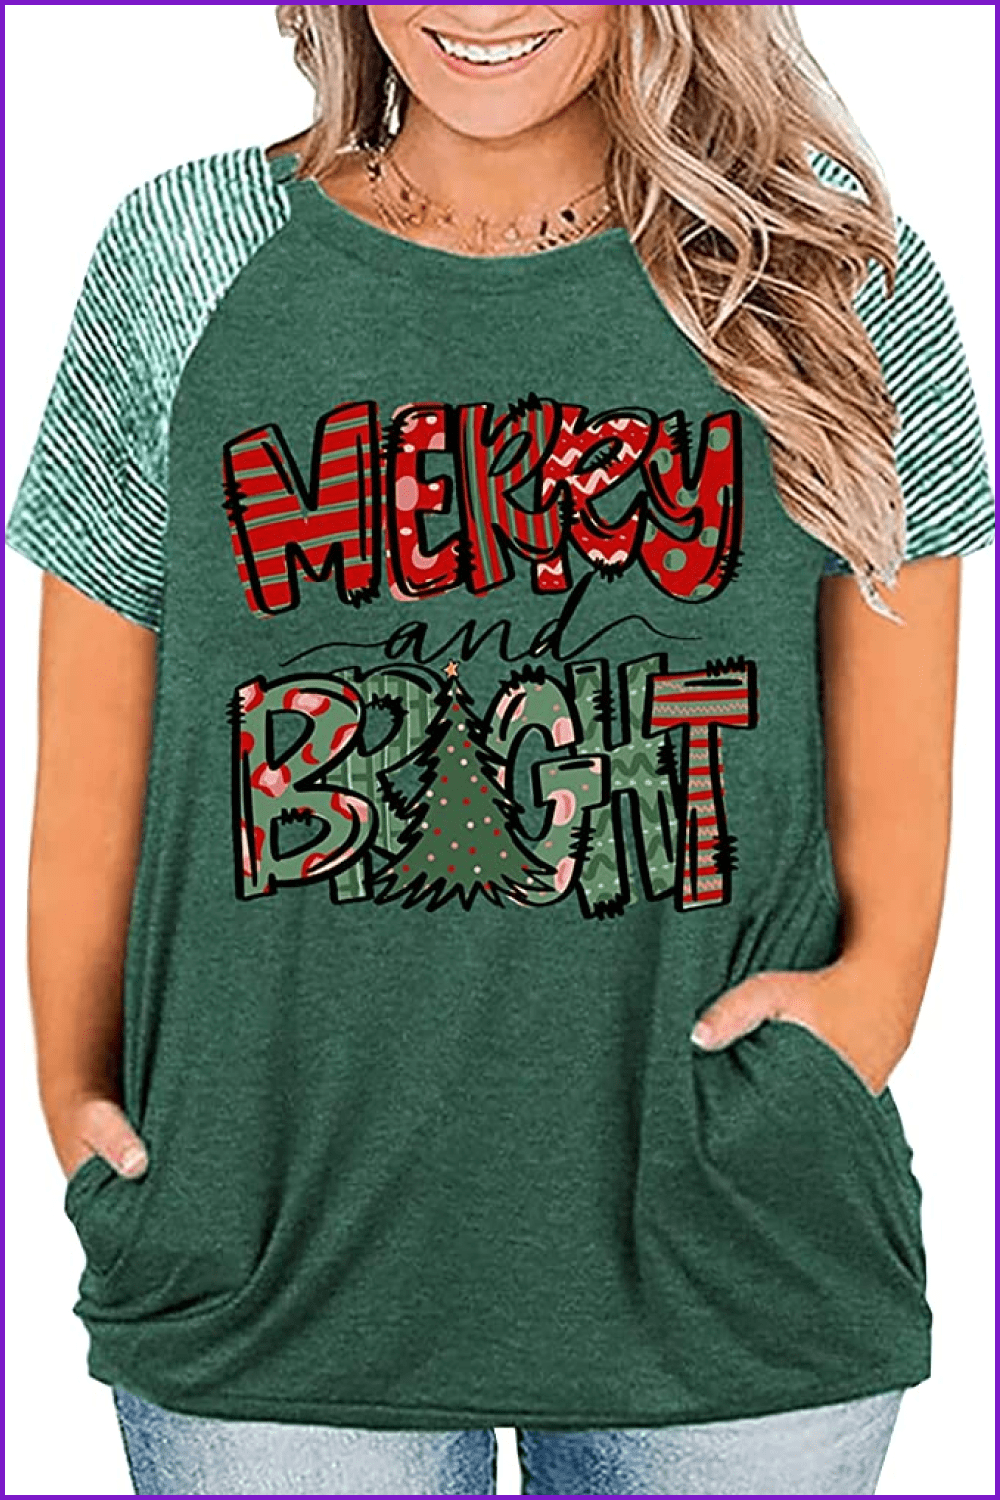 T-shirt with bright green color, big letters, exciting font, and a small Christmas tree.